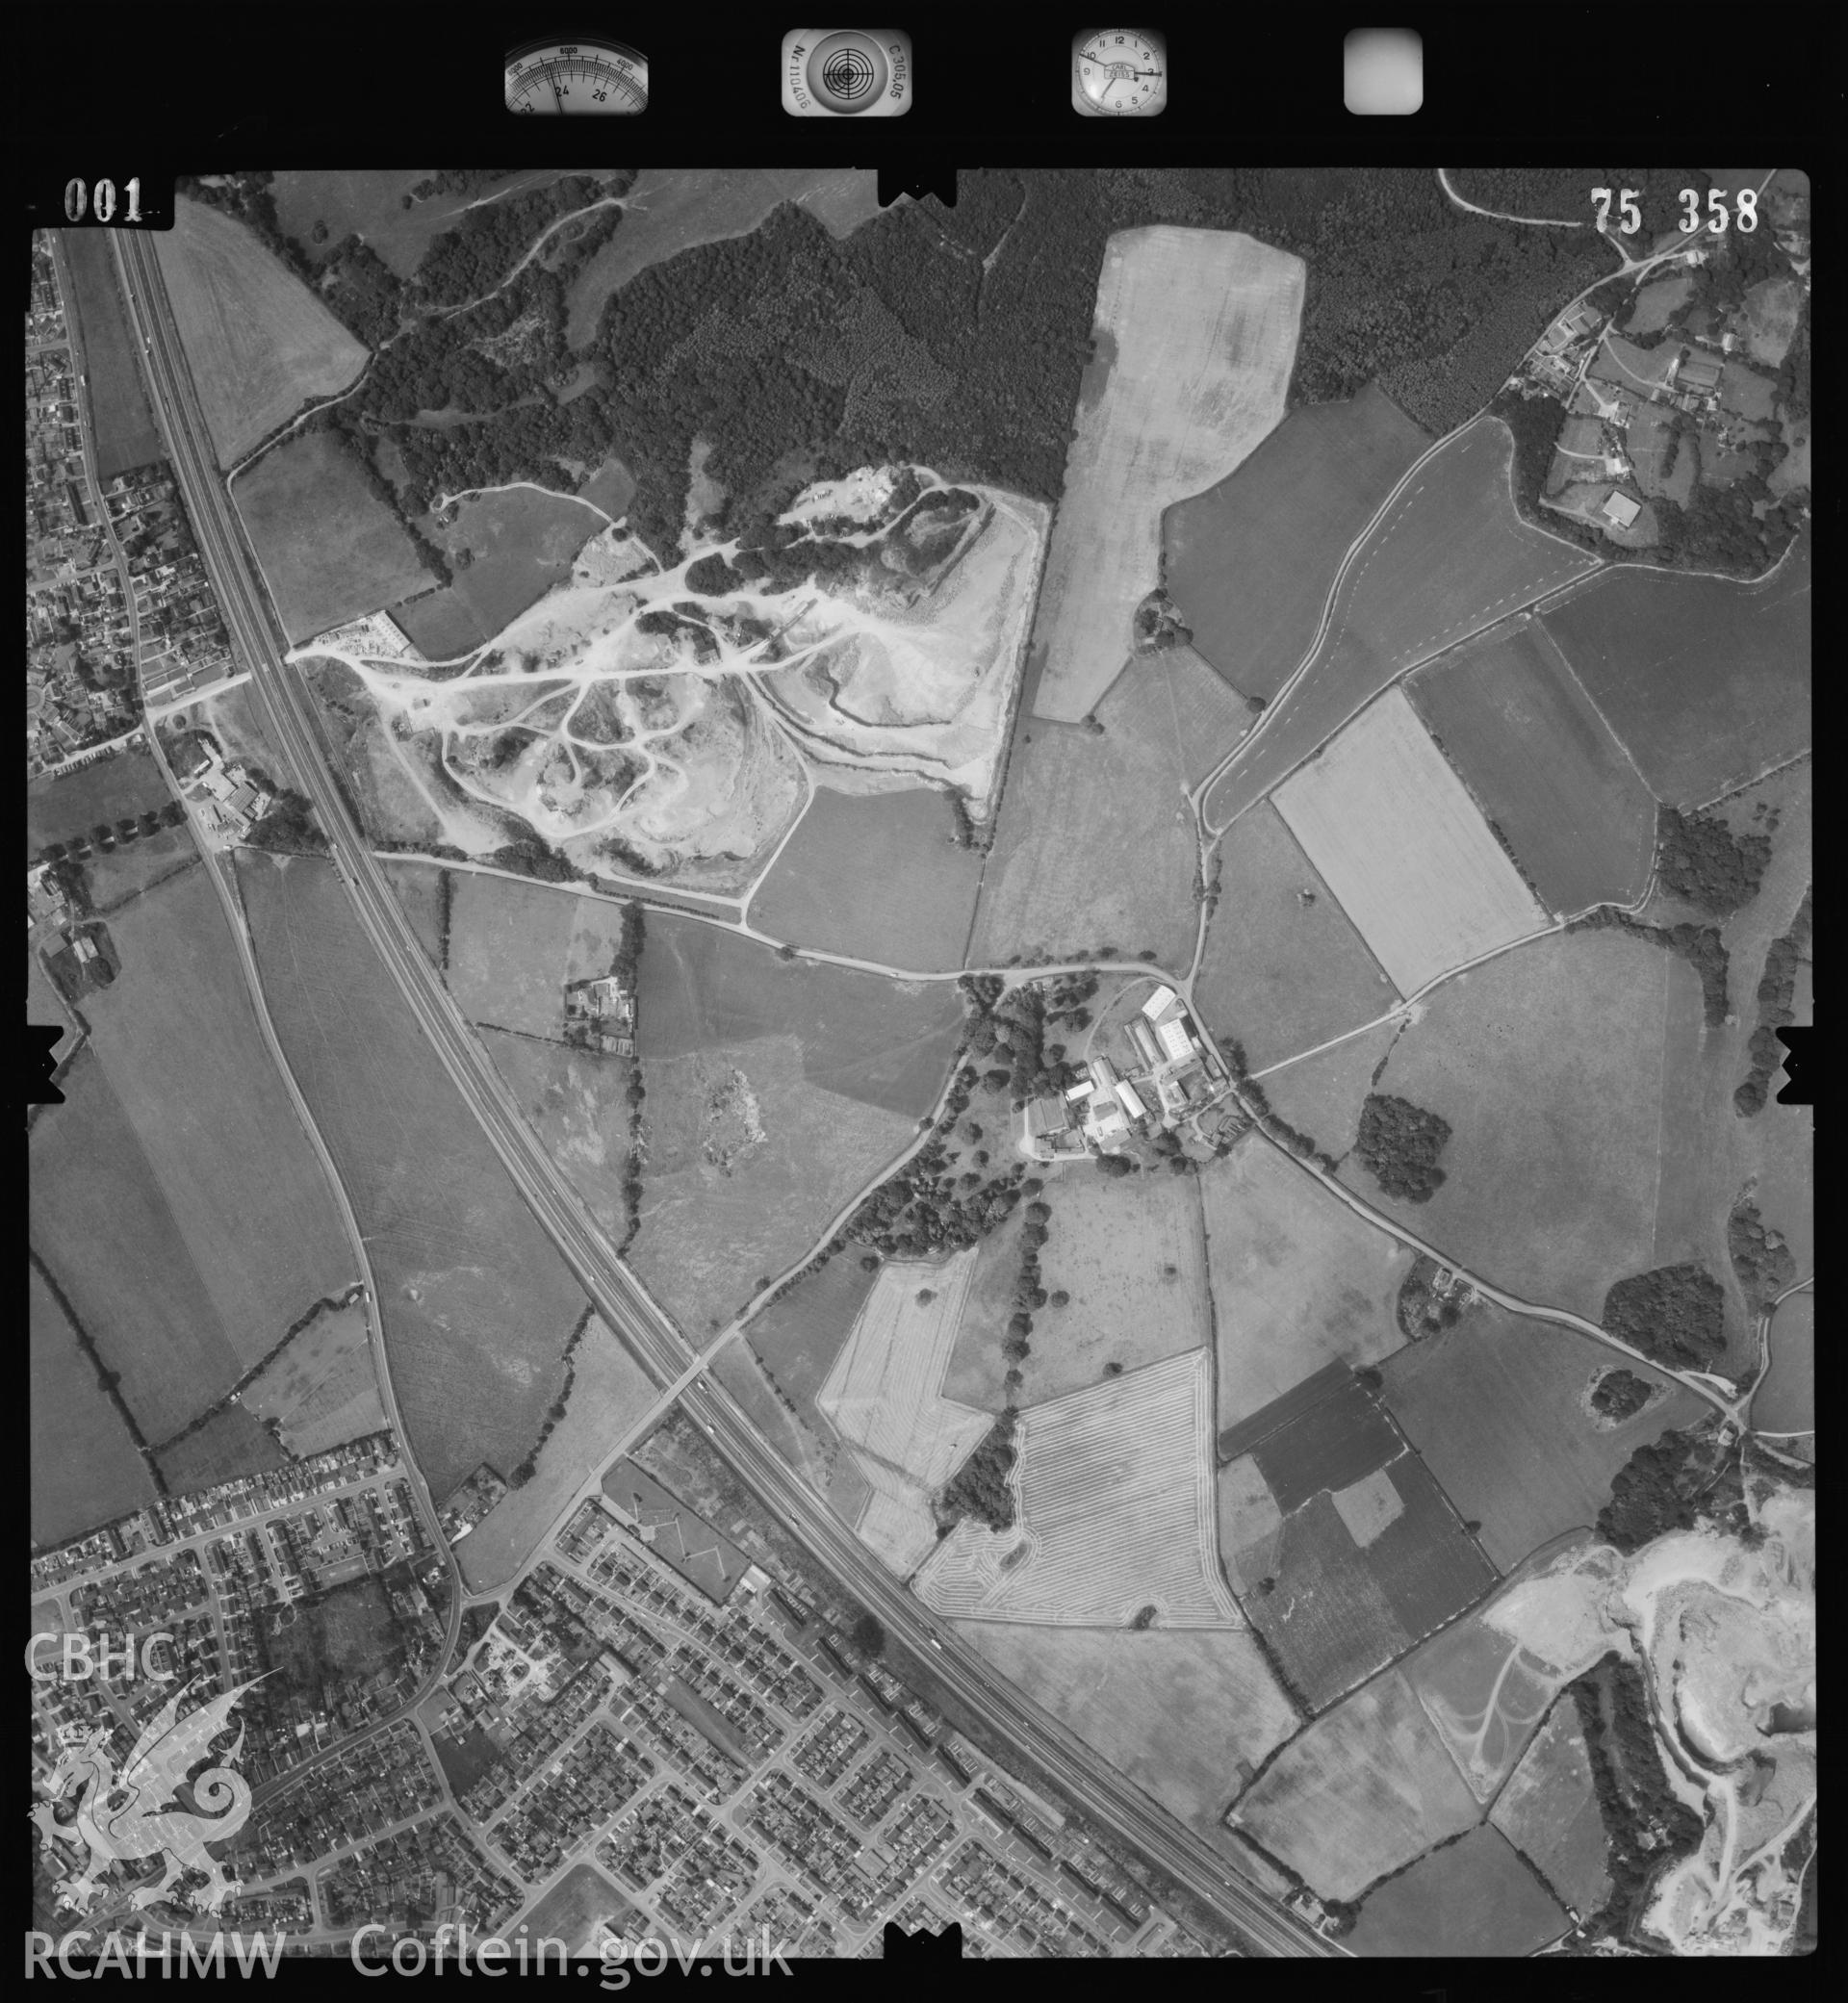 Digital copy of a black and white aerial photograph showing Brockwells Farm, Caerwent, taken by the Ordnance Survey 1975. Grid reference ST471895.